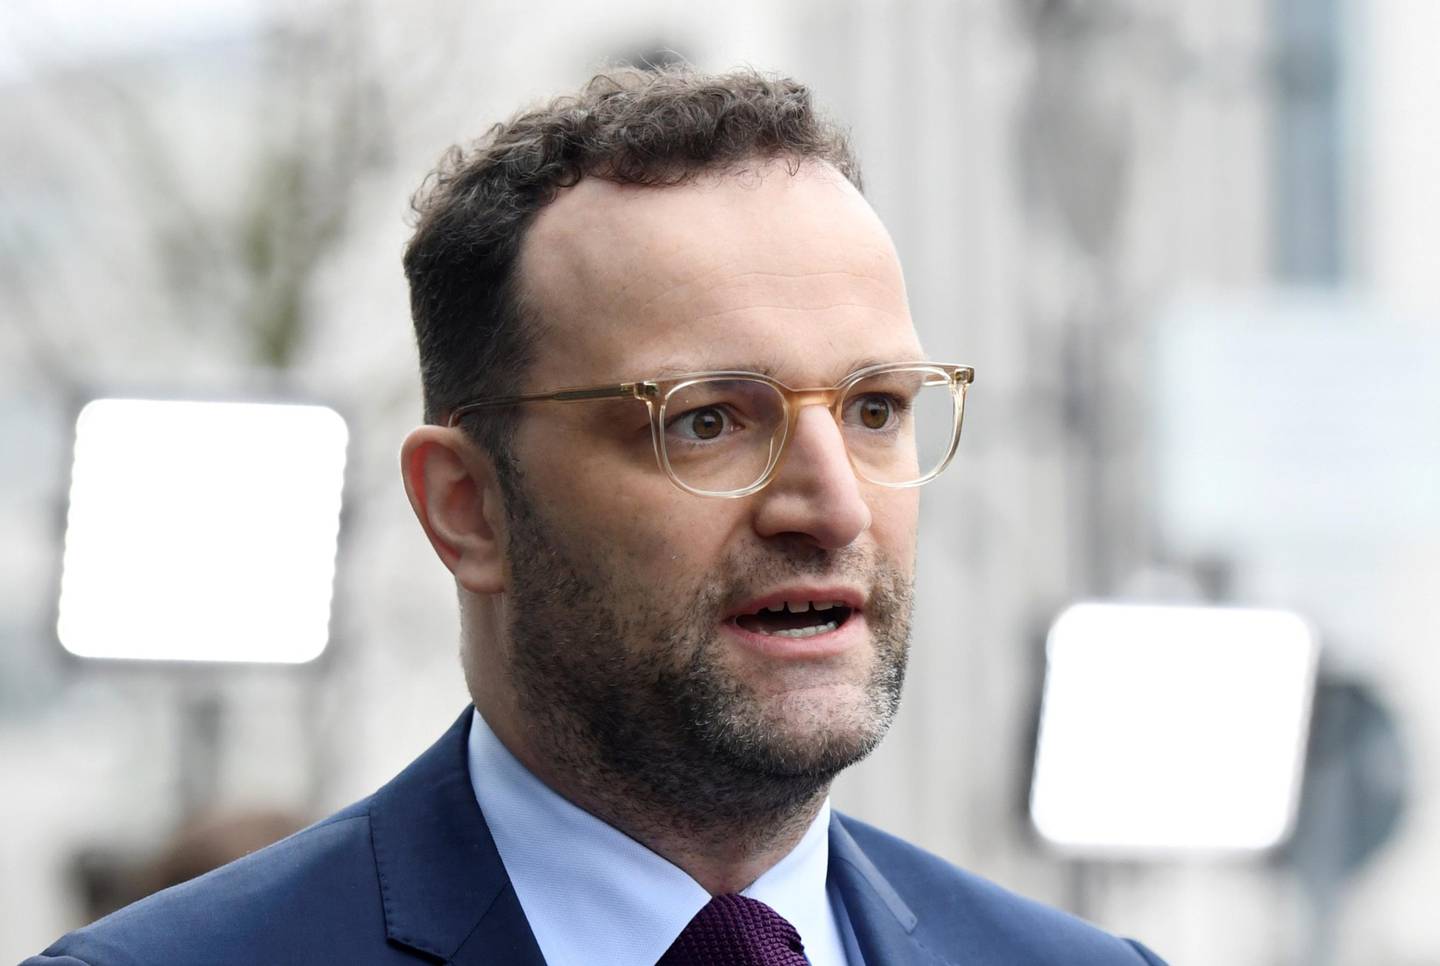 FILE PHOTO: German Health Minister Jens Spahn of the Christian Democratic Union (CDU) addresses the media in Berlin, Germany February 7, 2020.     REUTERS/Annegret Hilse/File Photo